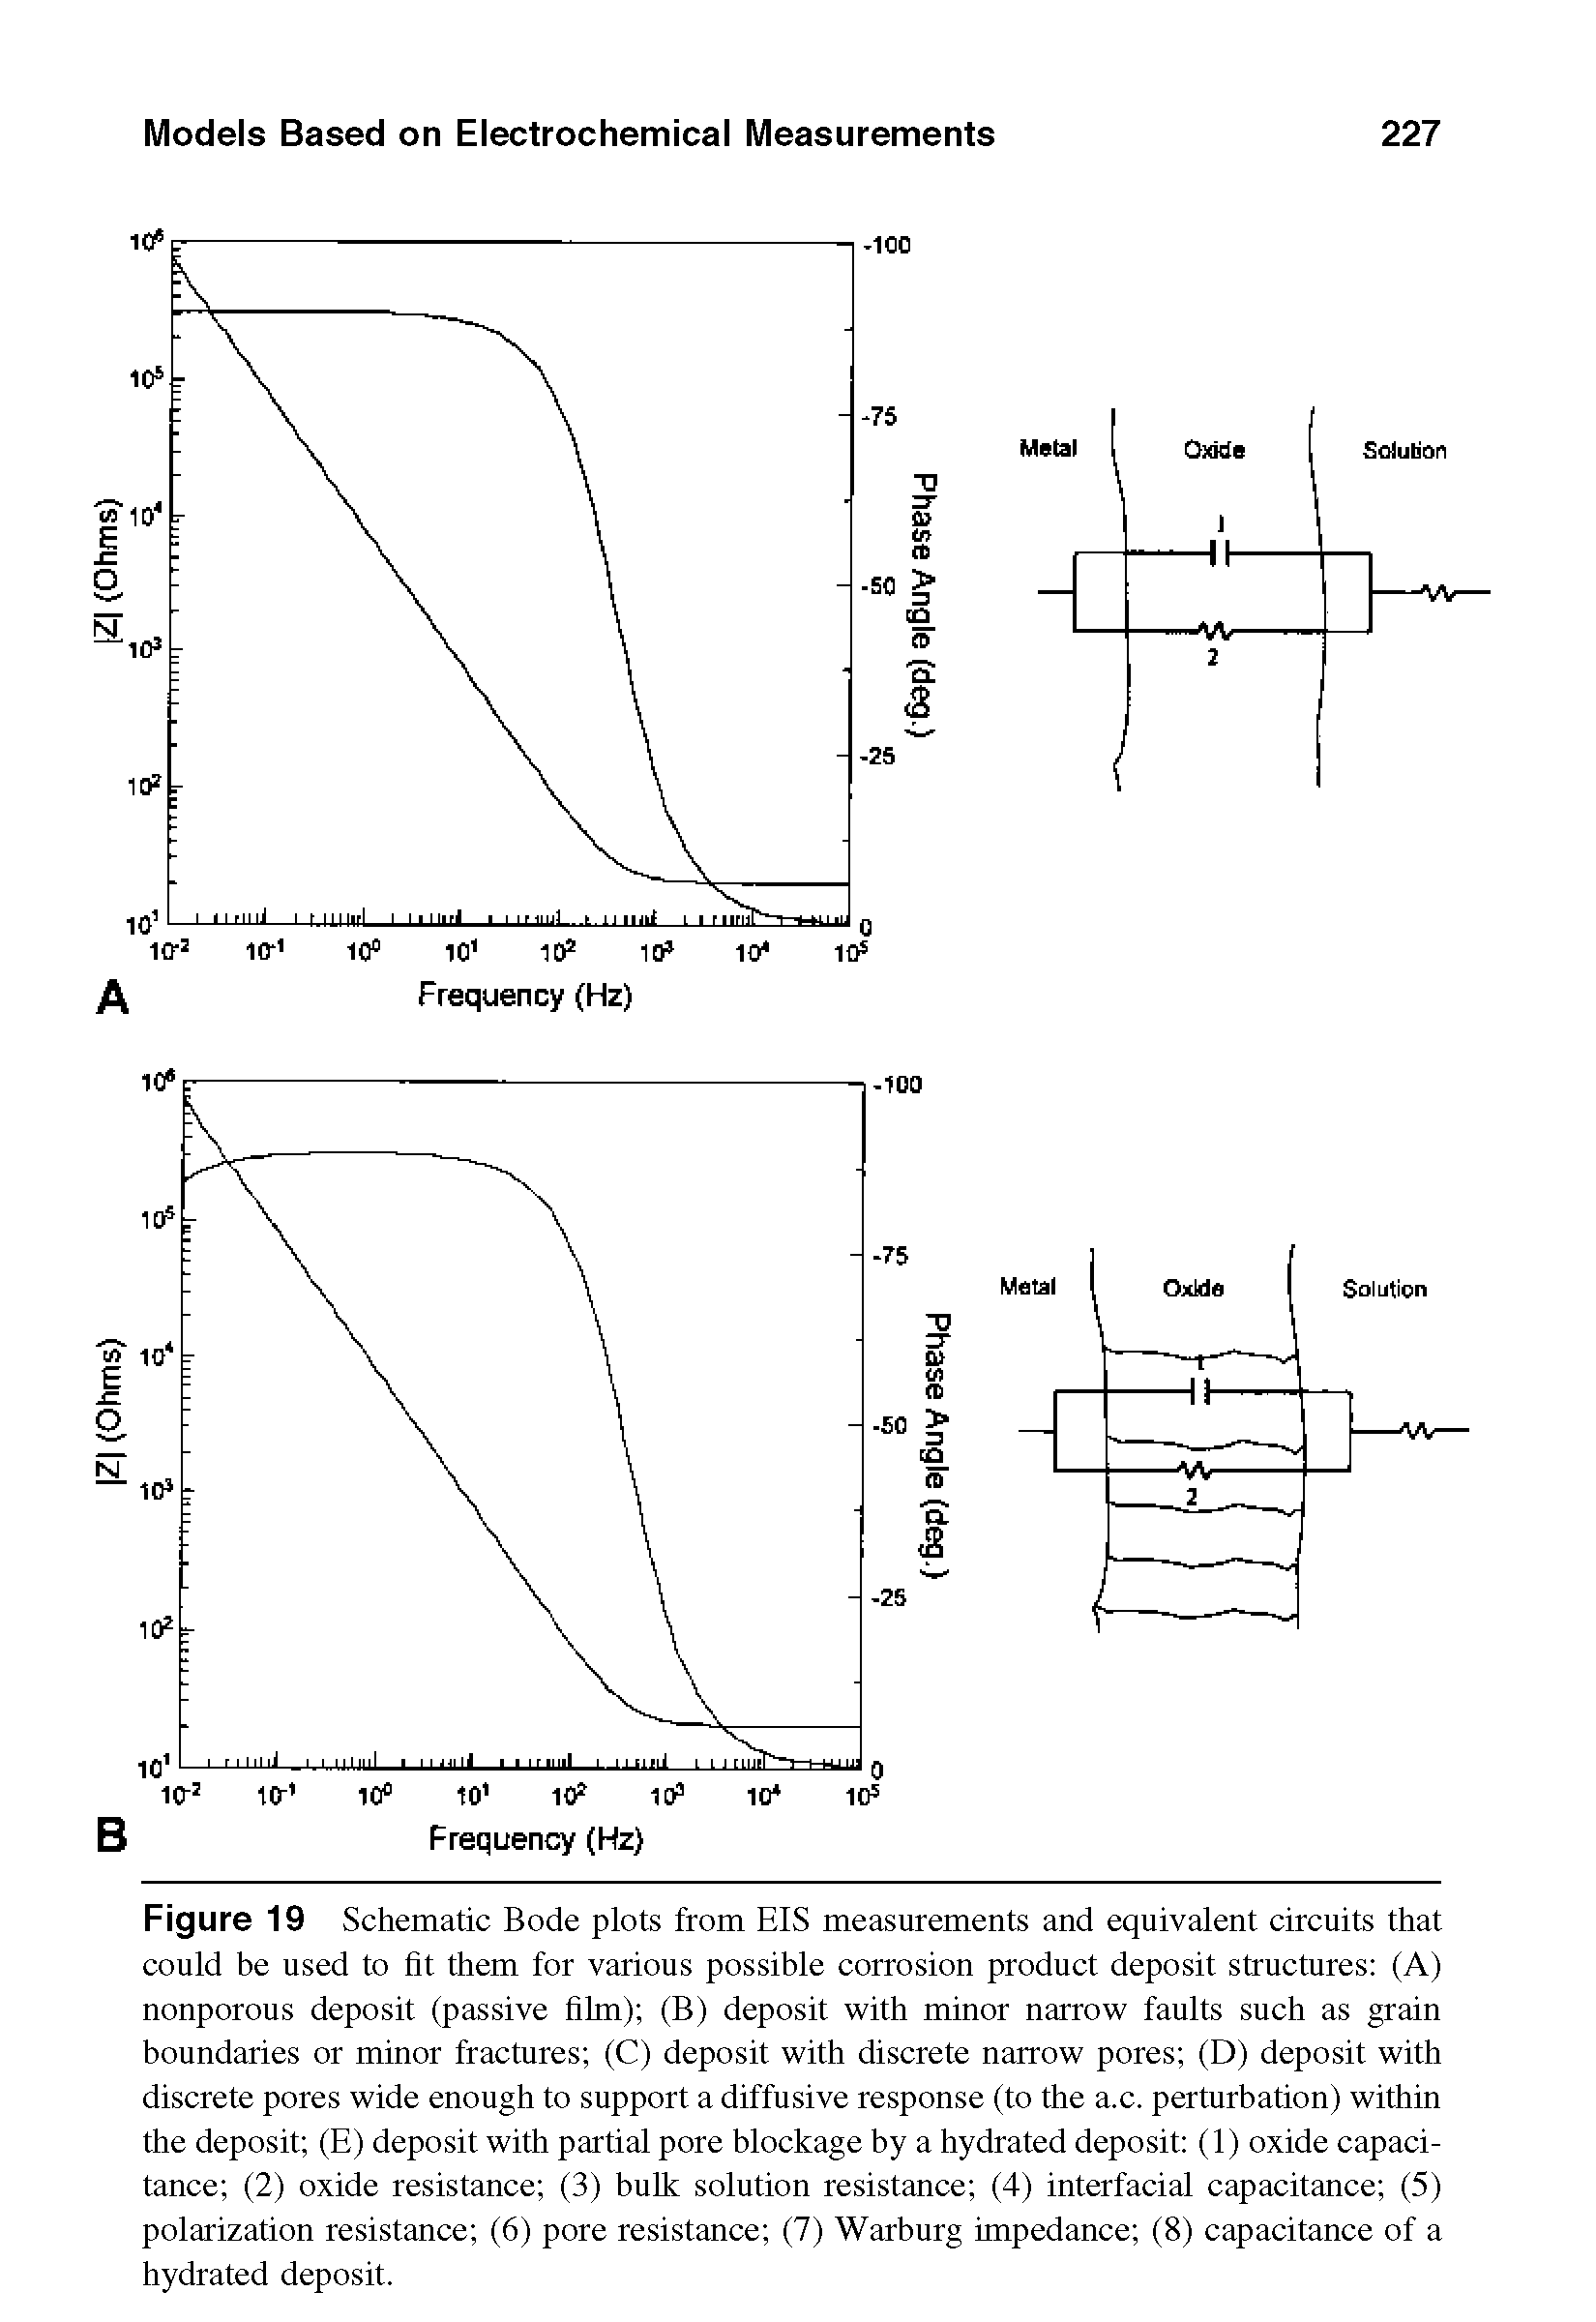 Figure 19 Schematic Bode plots from EIS measurements and equivalent circuits that could be used to fit them for various possible corrosion product deposit structures (A) nonporous deposit (passive film) (B) deposit with minor narrow faults such as grain boundaries or minor fractures (C) deposit with discrete narrow pores (D) deposit with discrete pores wide enough to support a diffusive response (to the a.c. perturbation) within the deposit (E) deposit with partial pore blockage by a hydrated deposit (1) oxide capacitance (2) oxide resistance (3) bulk solution resistance (4) interfacial capacitance (5) polarization resistance (6) pore resistance (7) Warburg impedance (8) capacitance of a hydrated deposit.